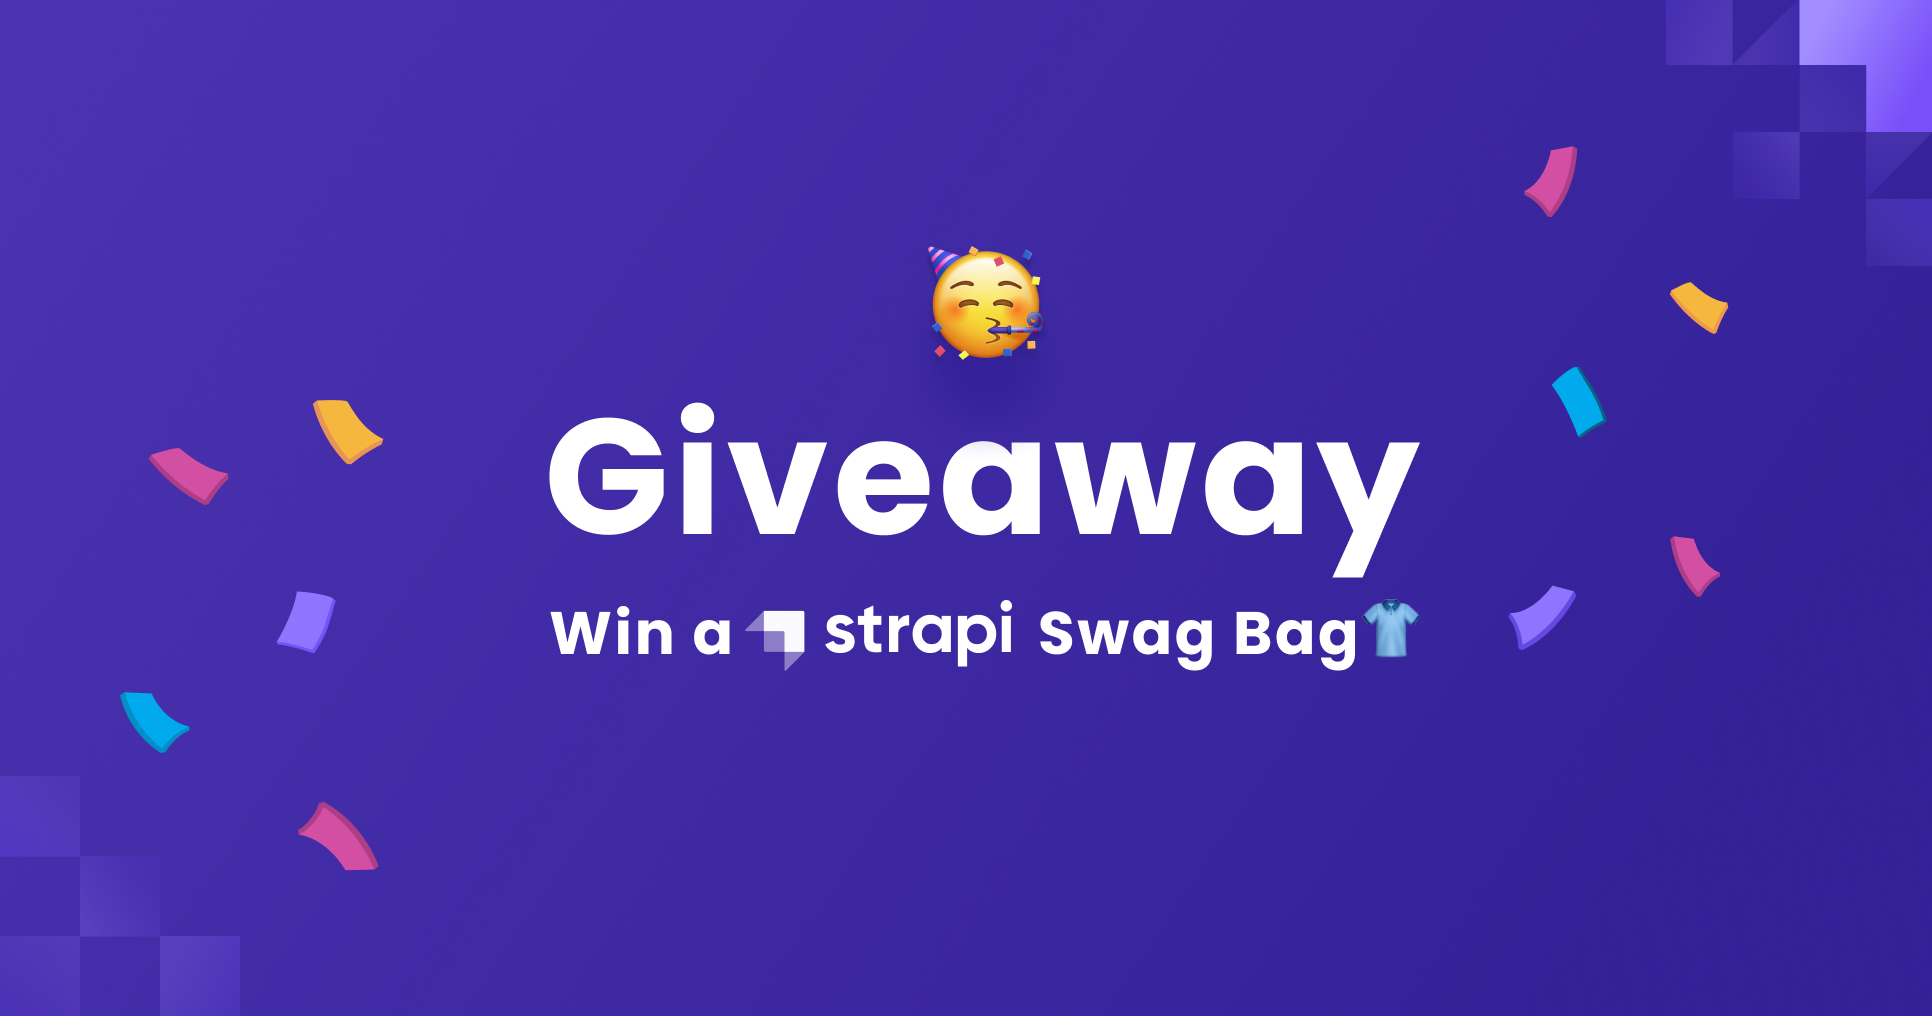 <p>Your Chance to Win a Strapi Swag Bag</p>
